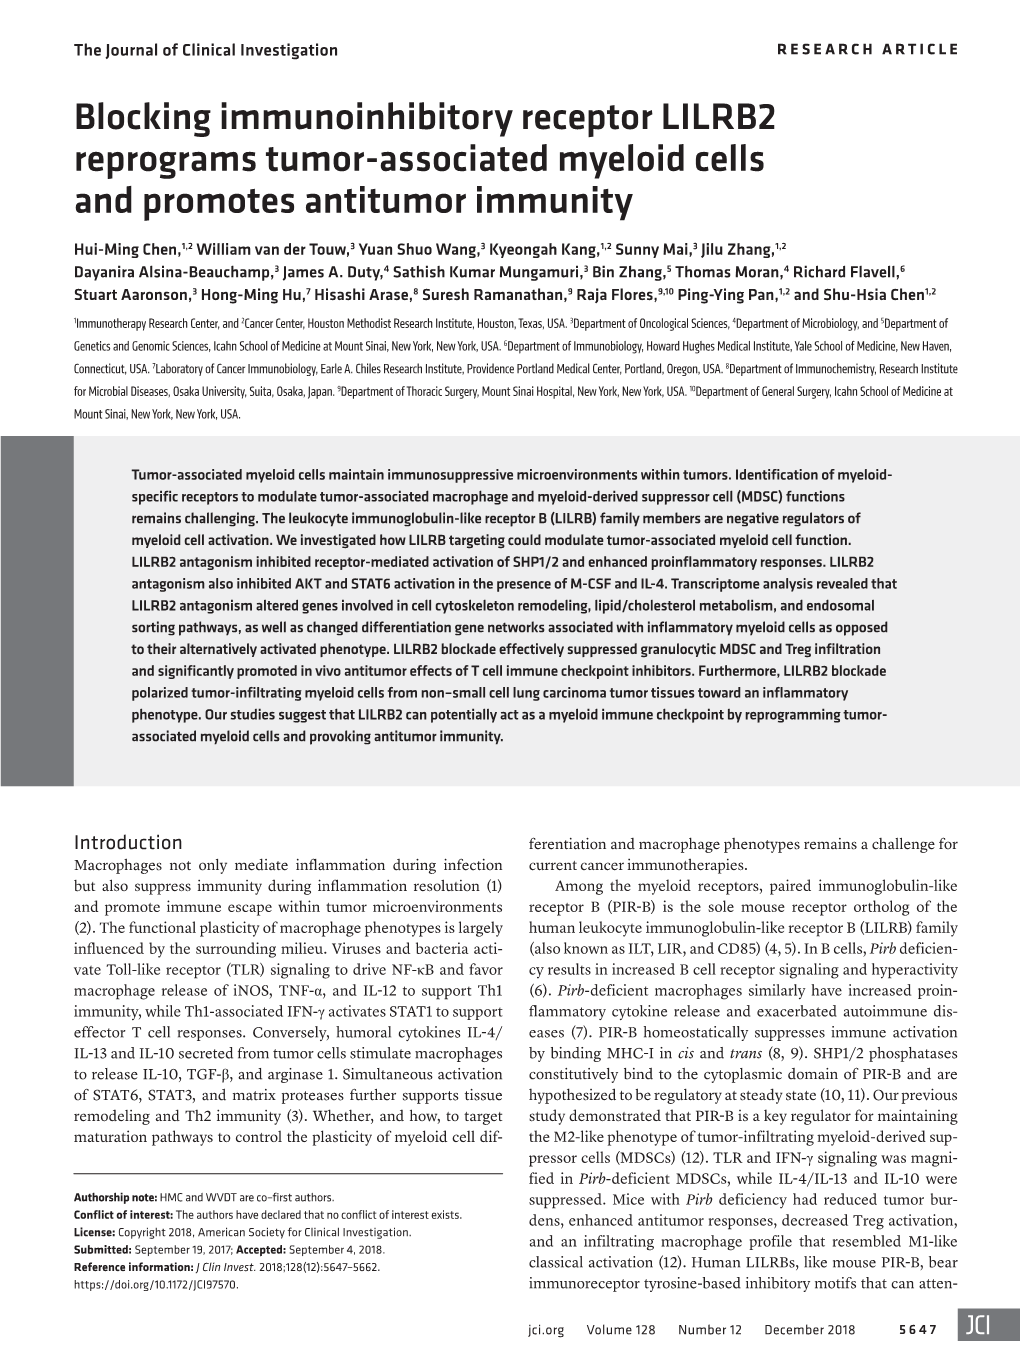 Blocking Immunoinhibitory Receptor LILRB2 Reprograms Tumor-Associated Myeloid Cells and Promotes Antitumor Immunity